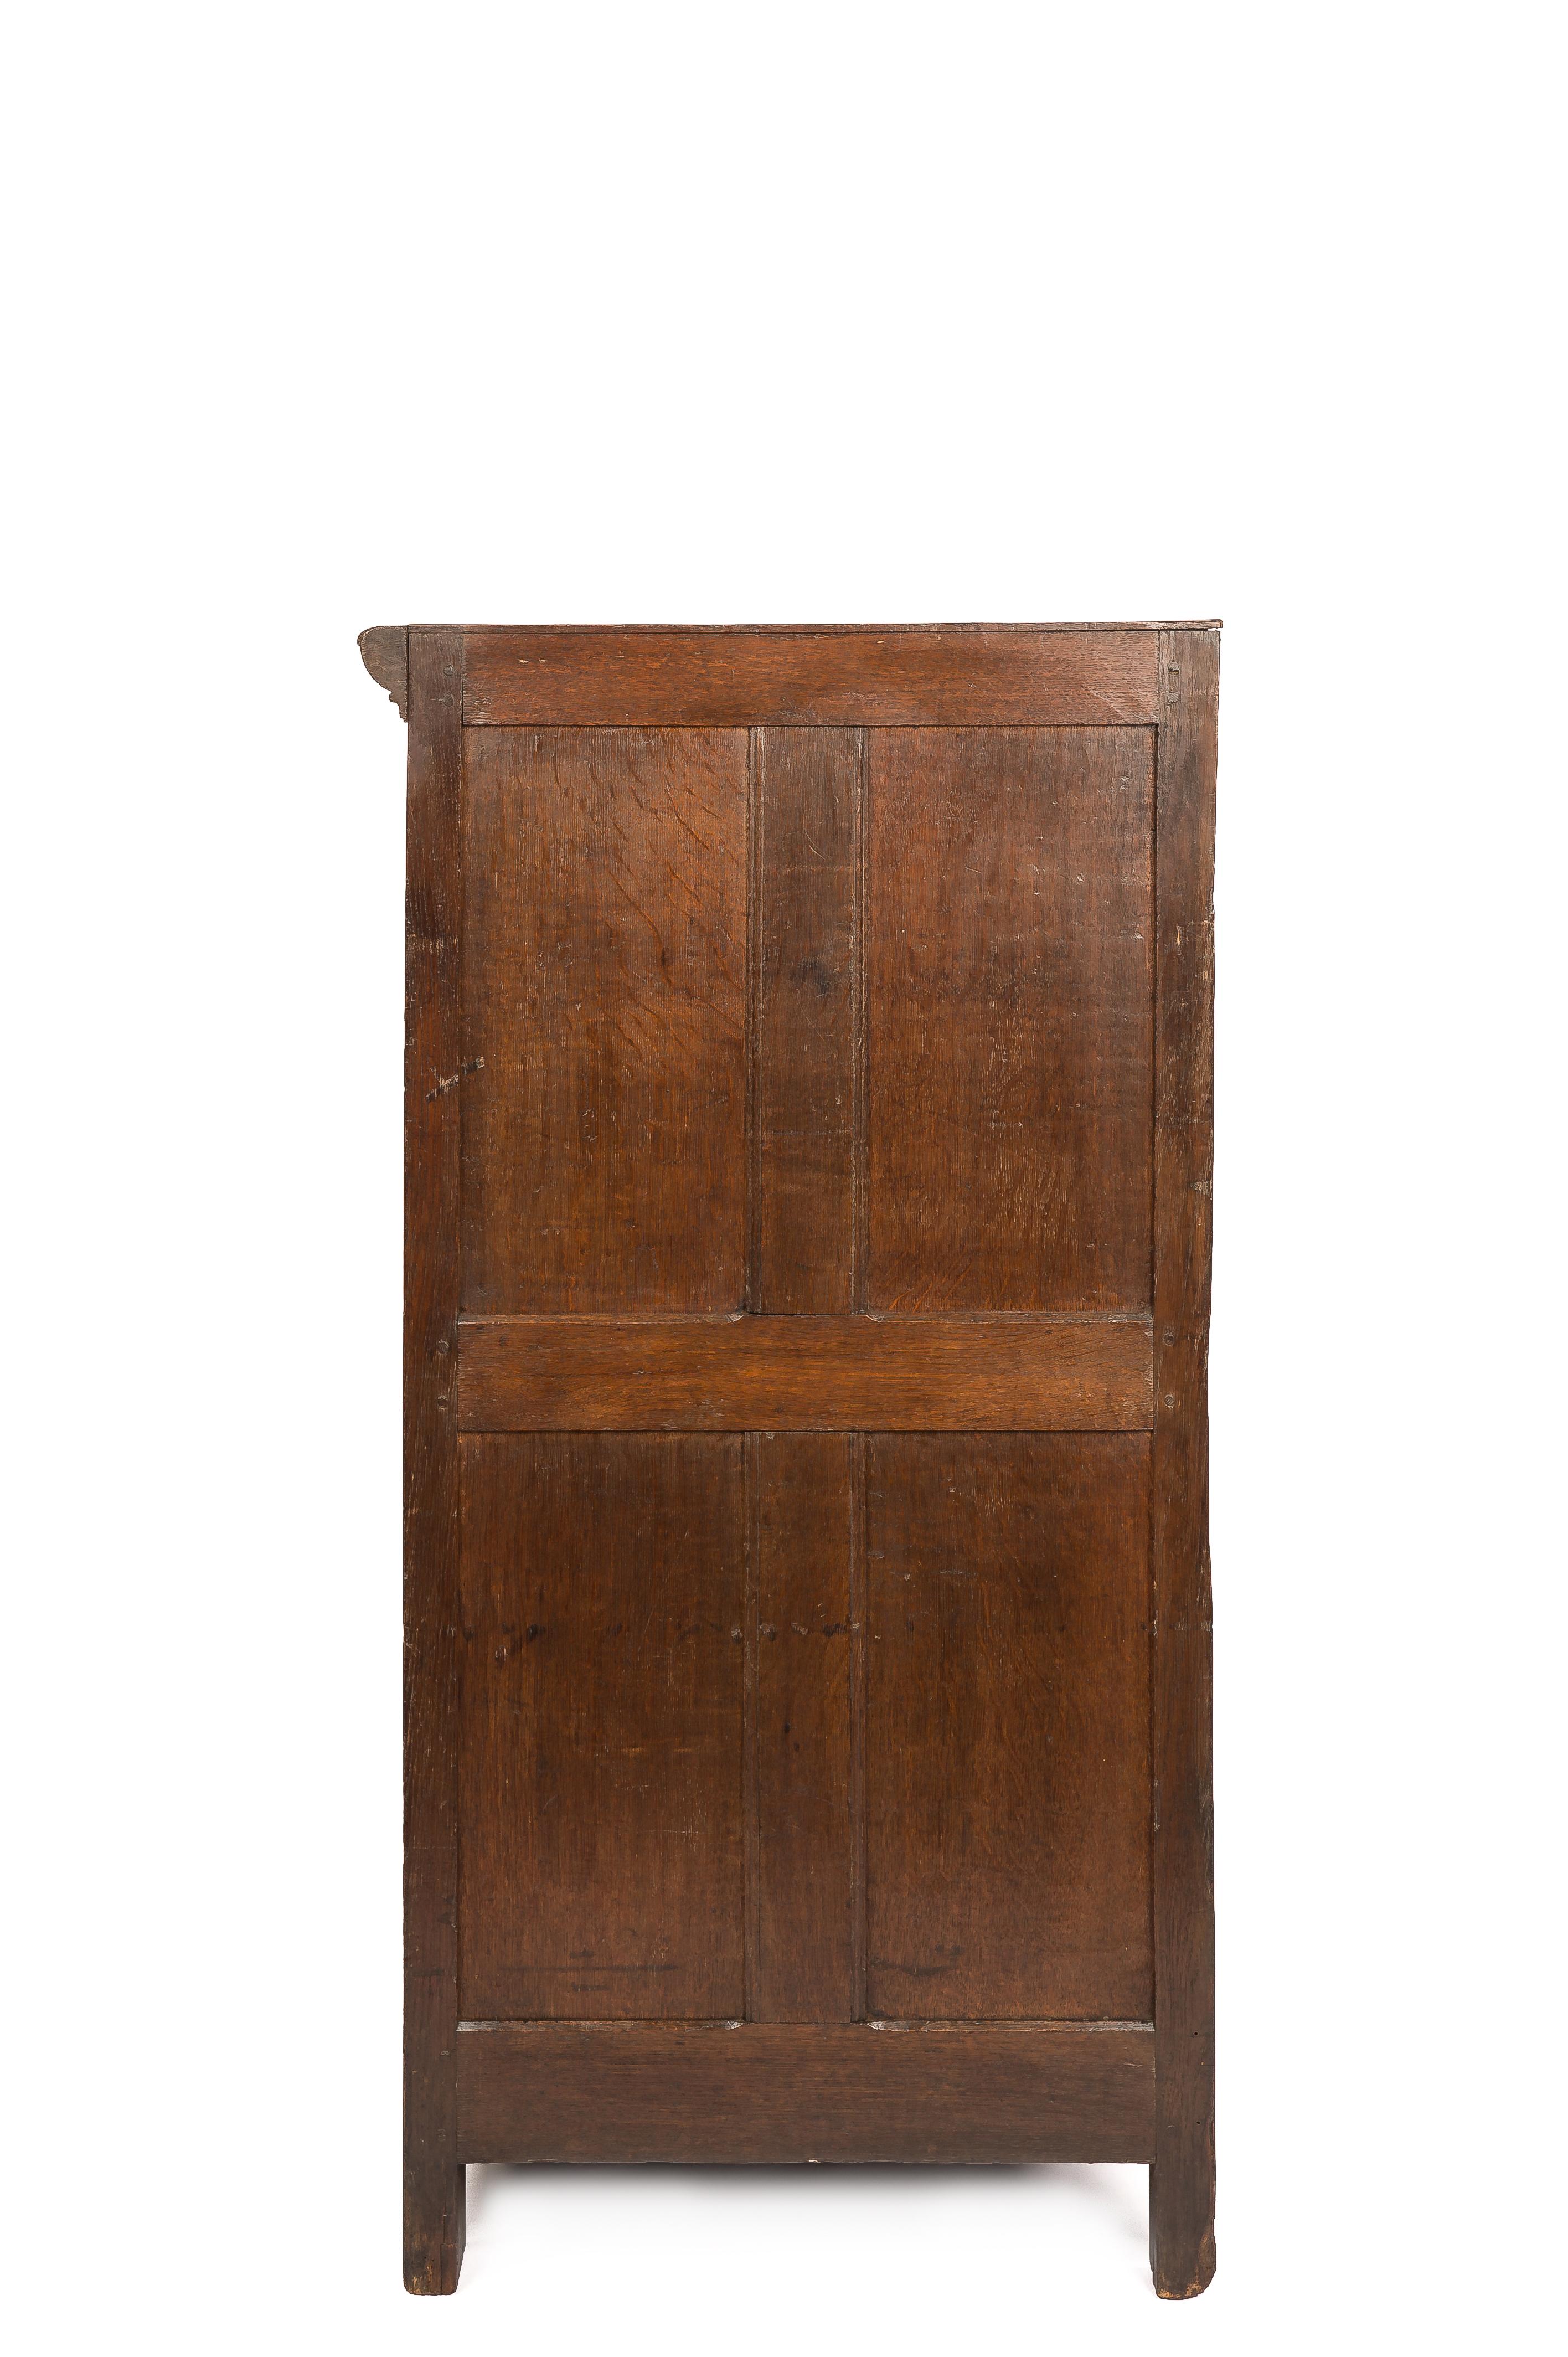 Antique Late 17th Century Dutch Renaissance Single-Door Cabinet in Solid Oak In Good Condition For Sale In Casteren, NL